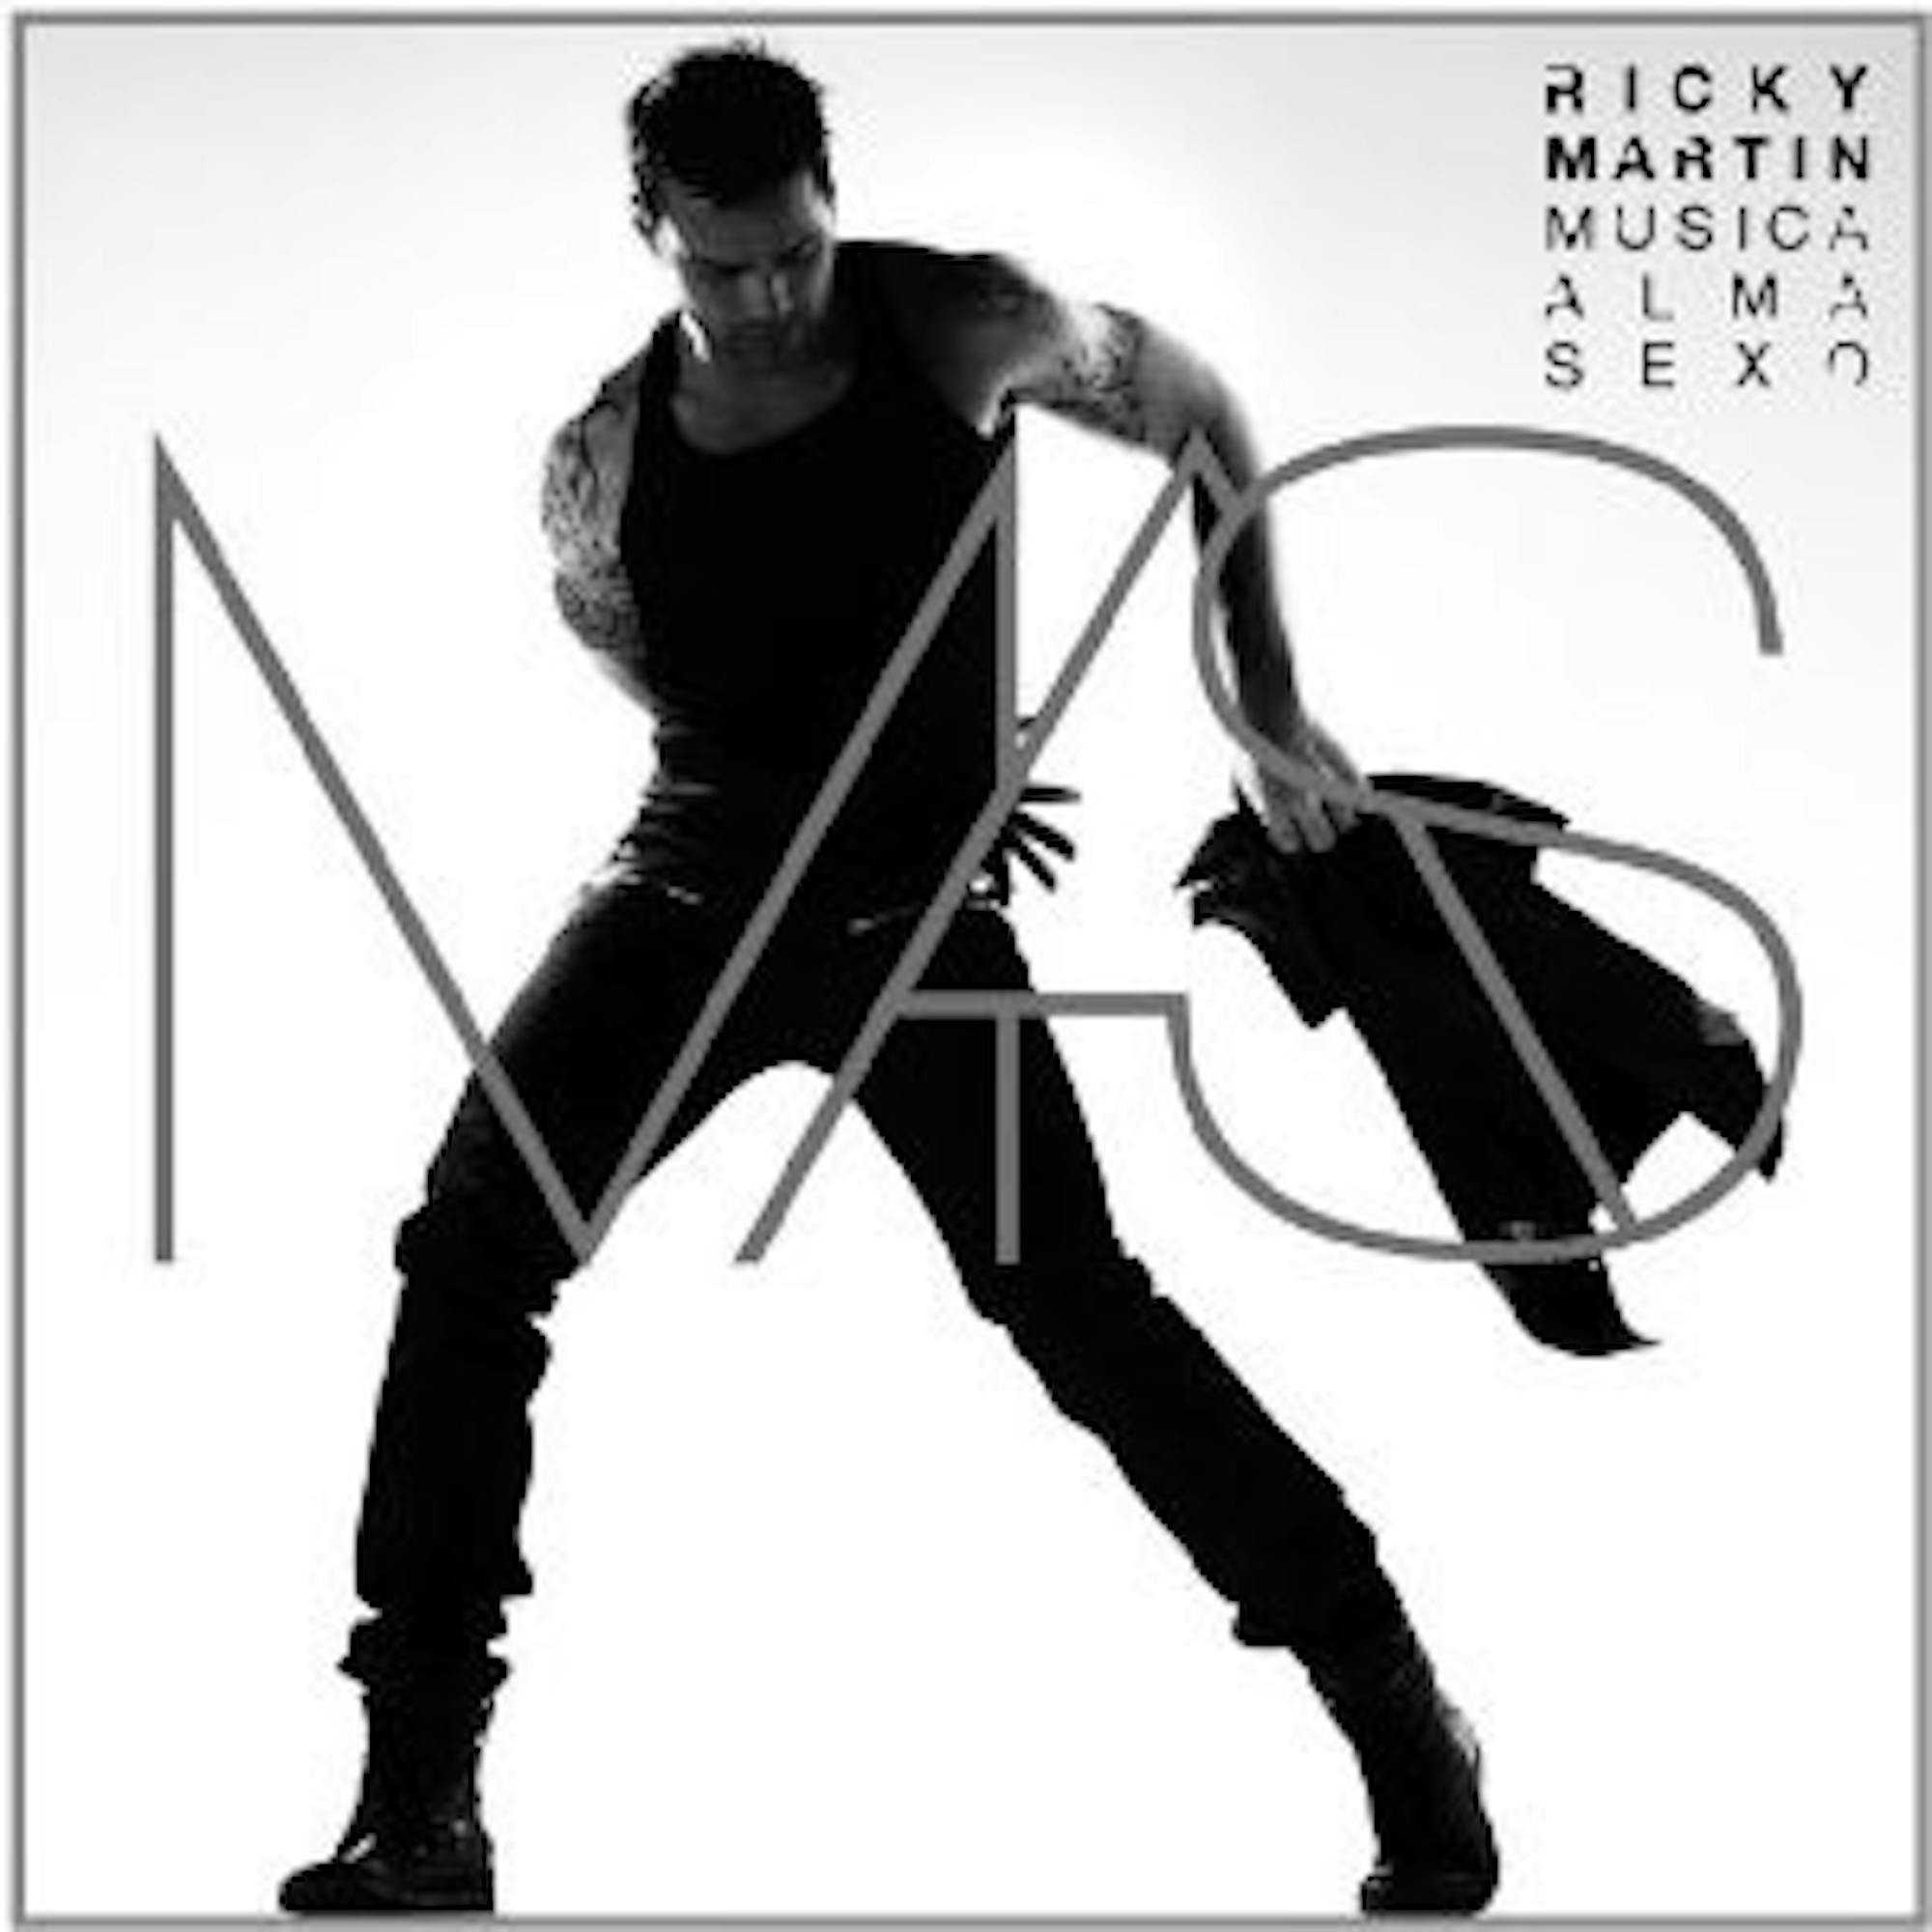 For his new album, Ricky Martin is still stuck in the ‘90s. 